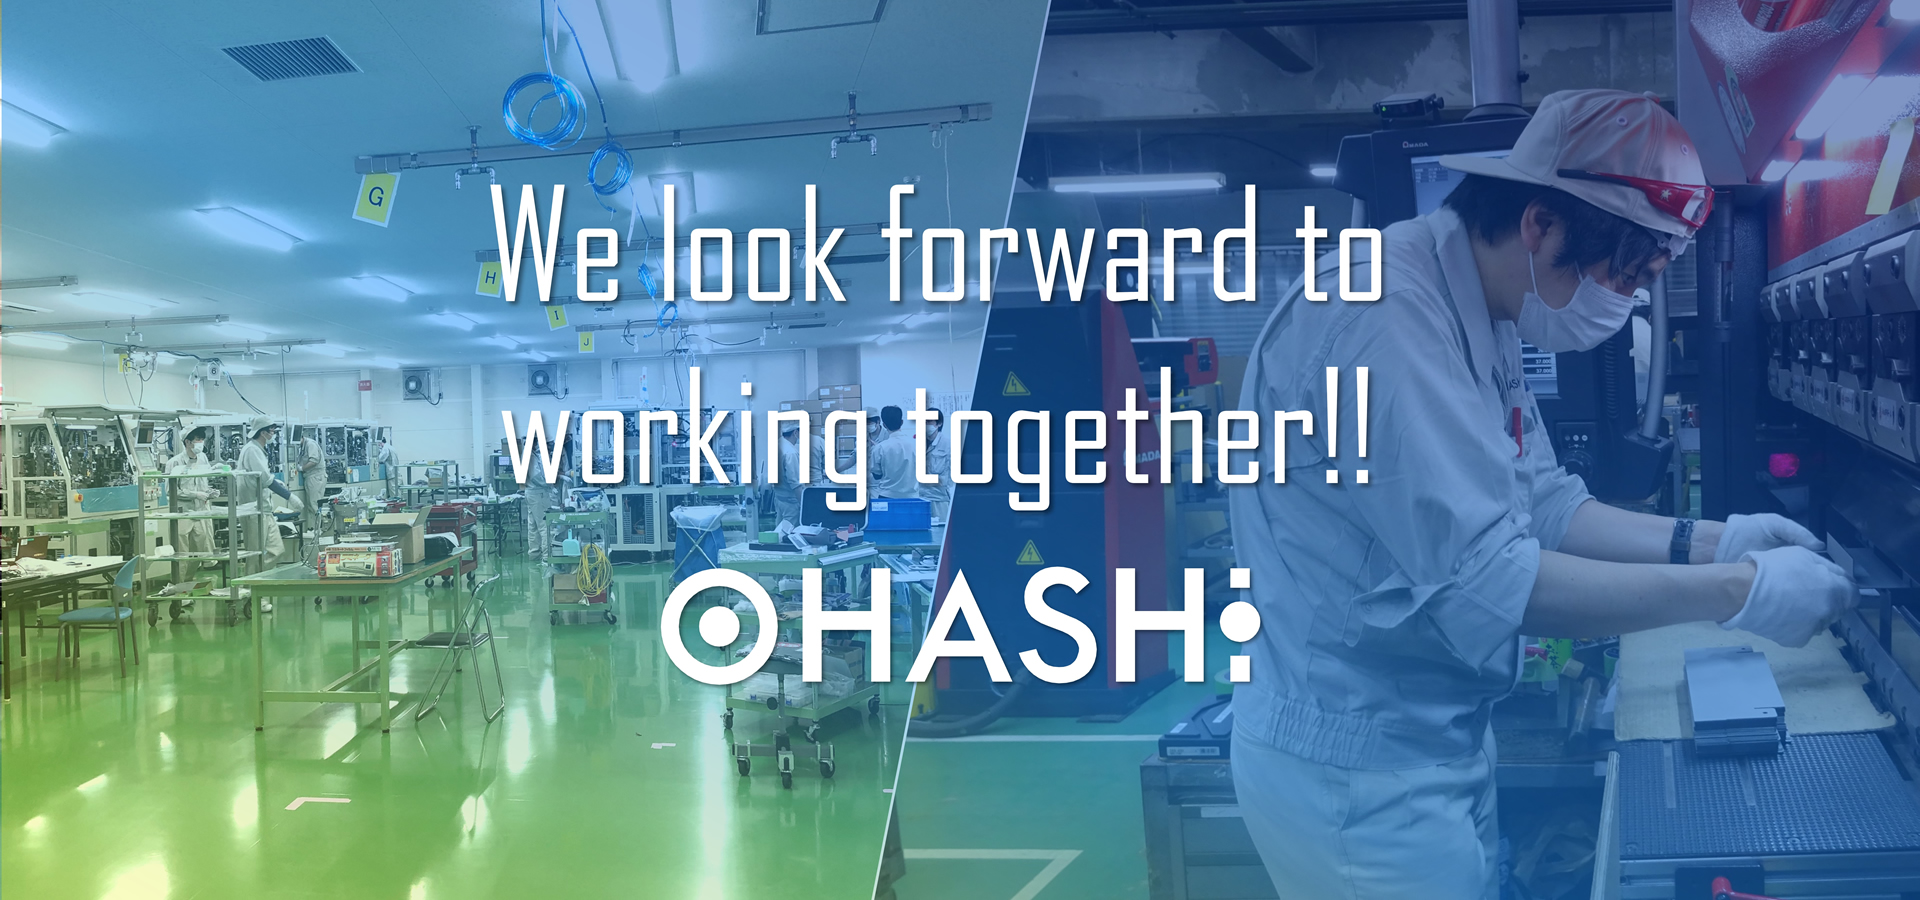 We look forward to working together!! OHASHI